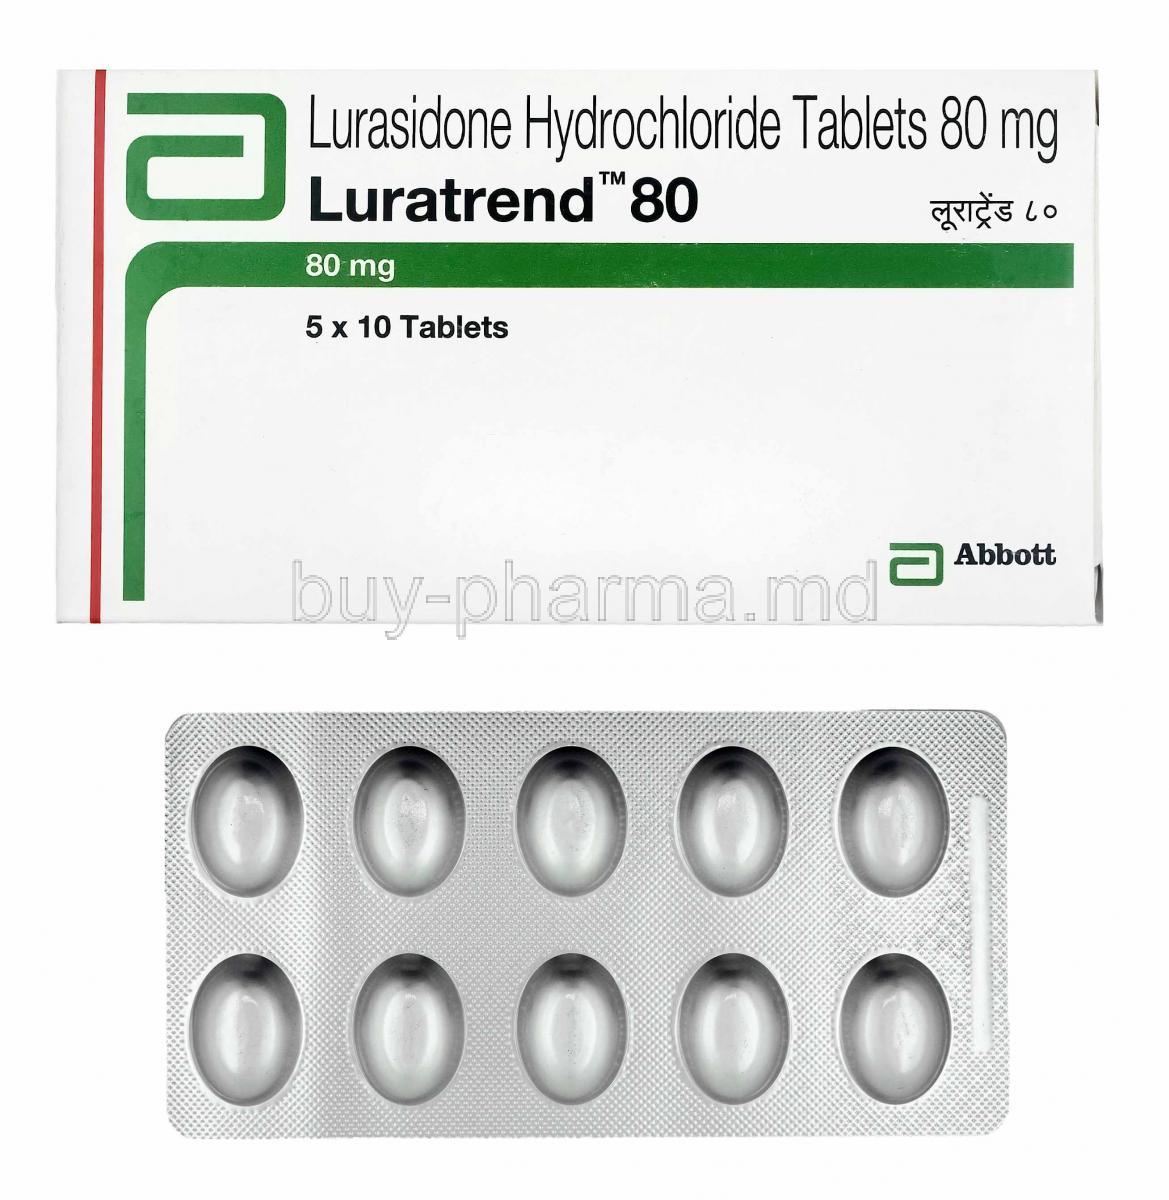 Luratrend, Lurasidone 80mg box and tablets